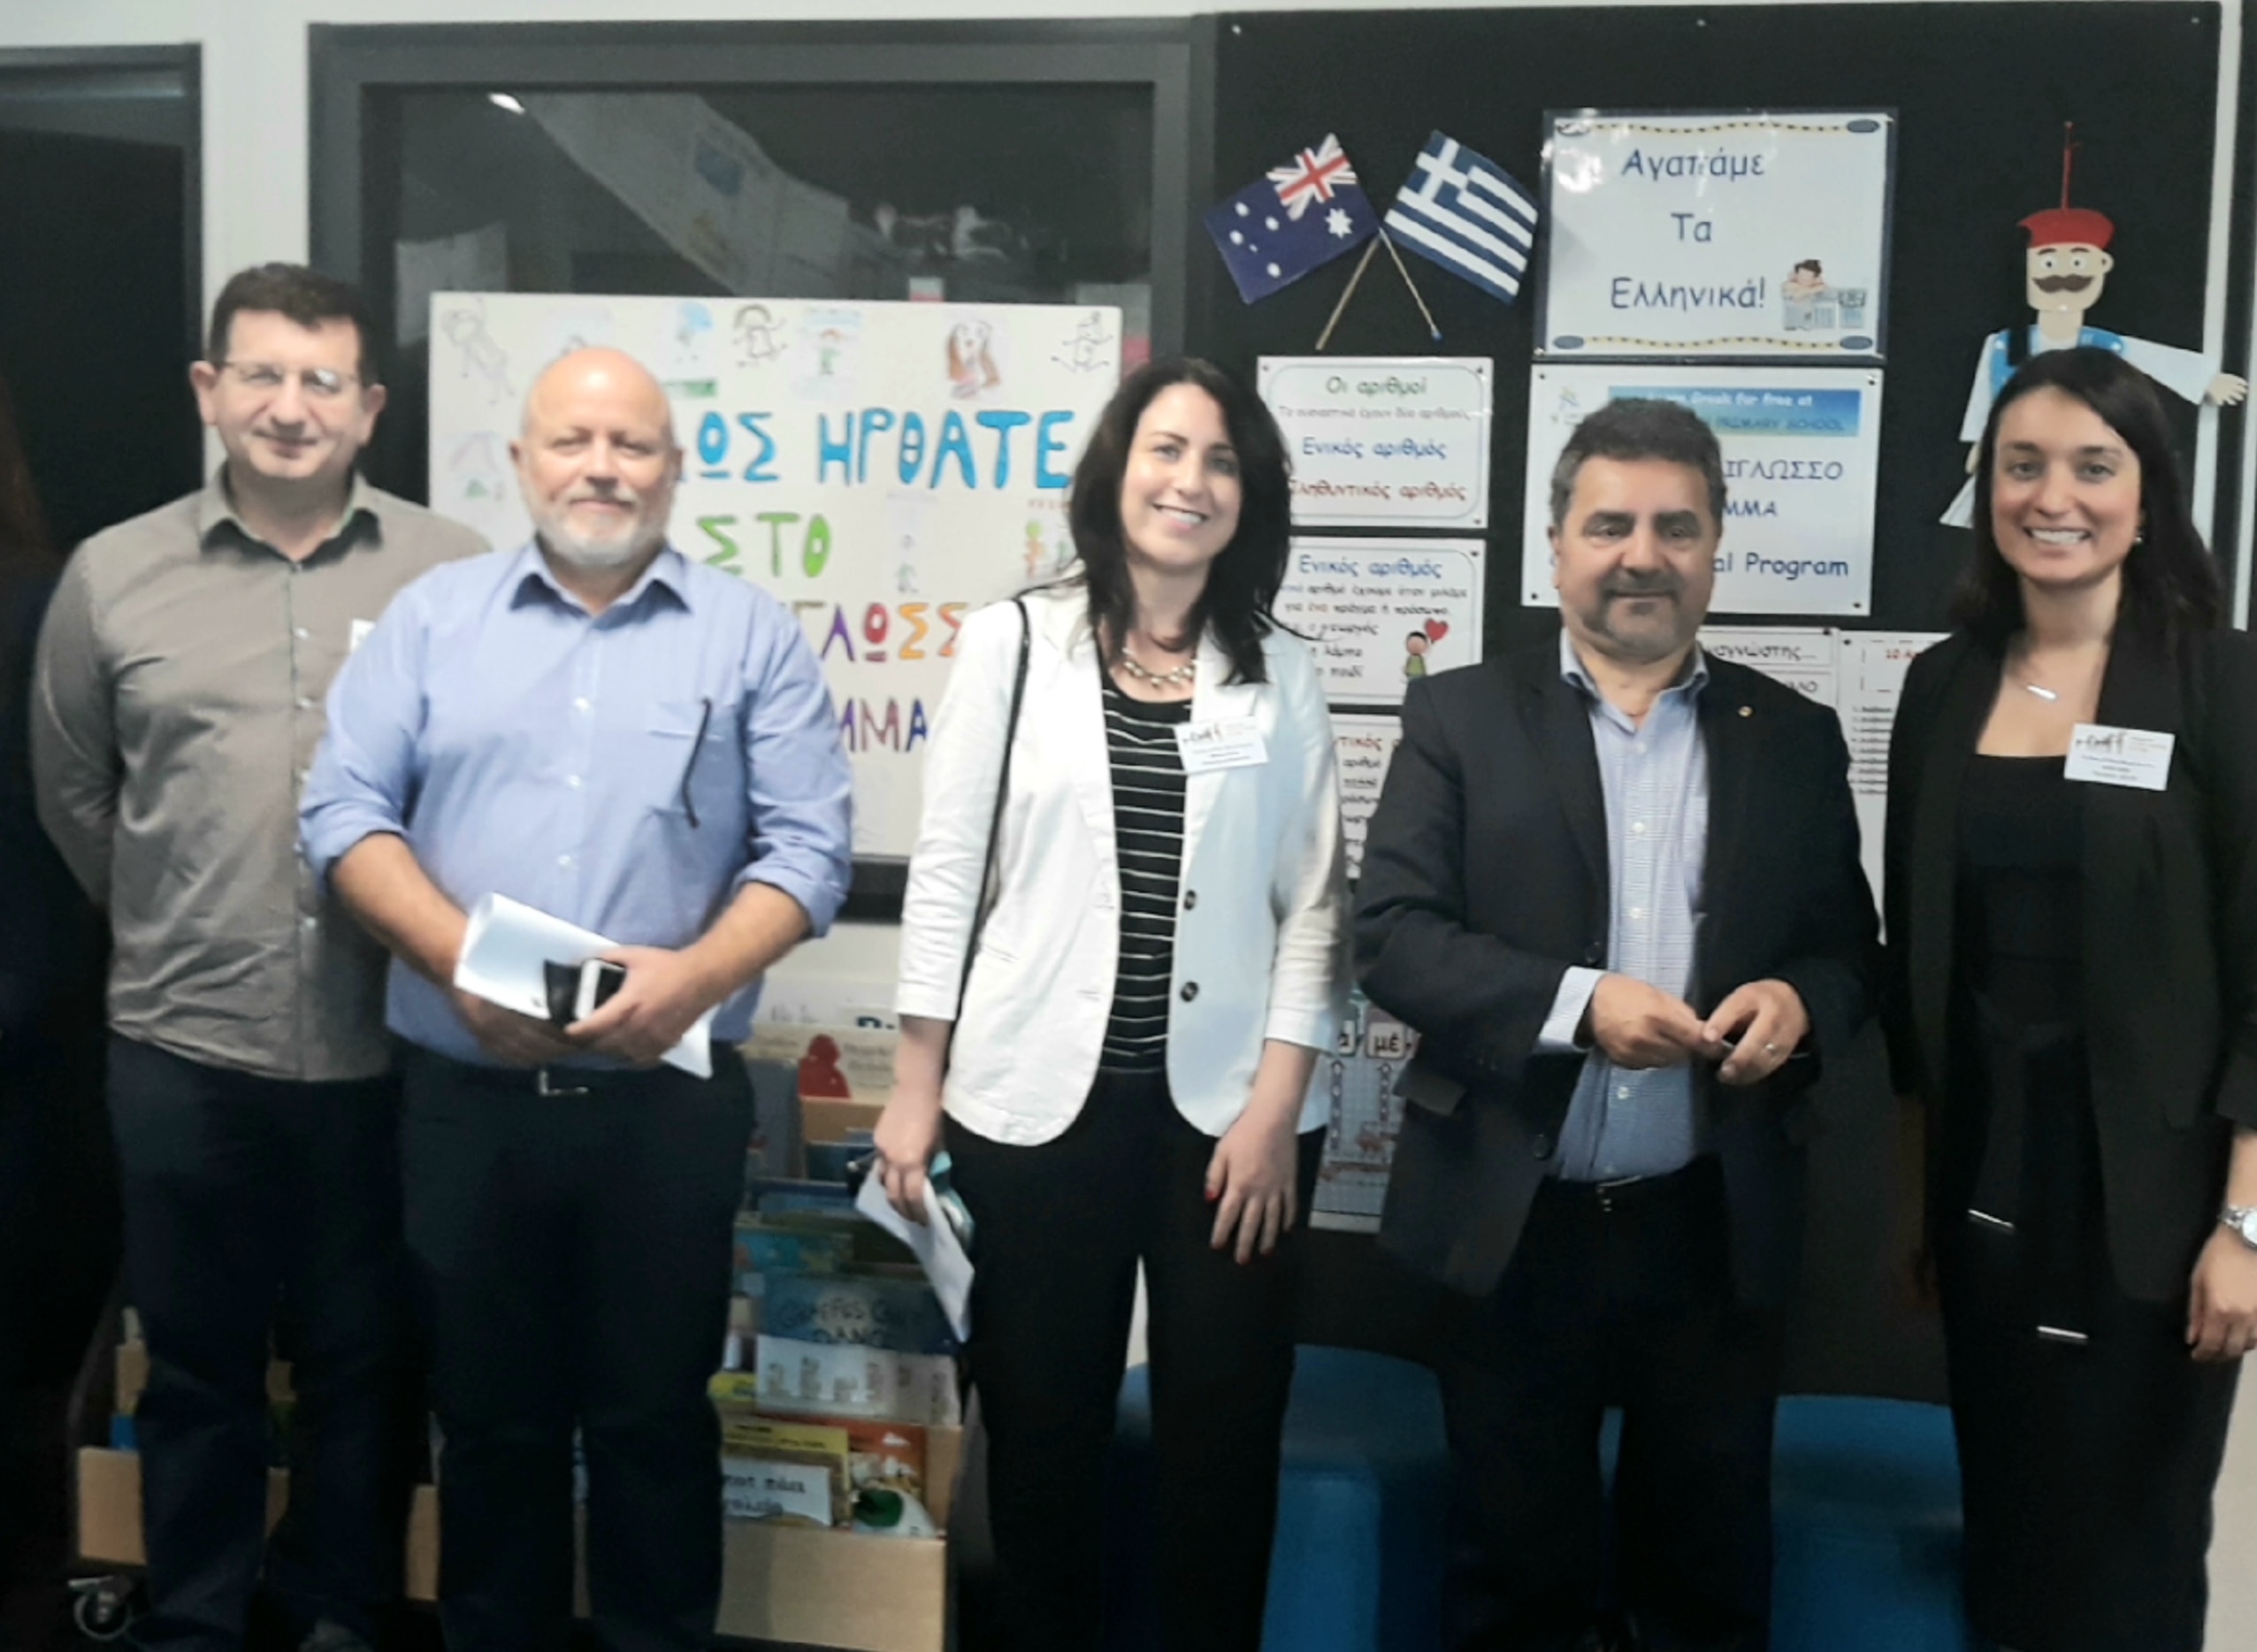 The Modern Greek Teachers Association of Victoria - MGTAV Research Launch took place on the 23rd of February 2020 at Lalor North Primary School. 